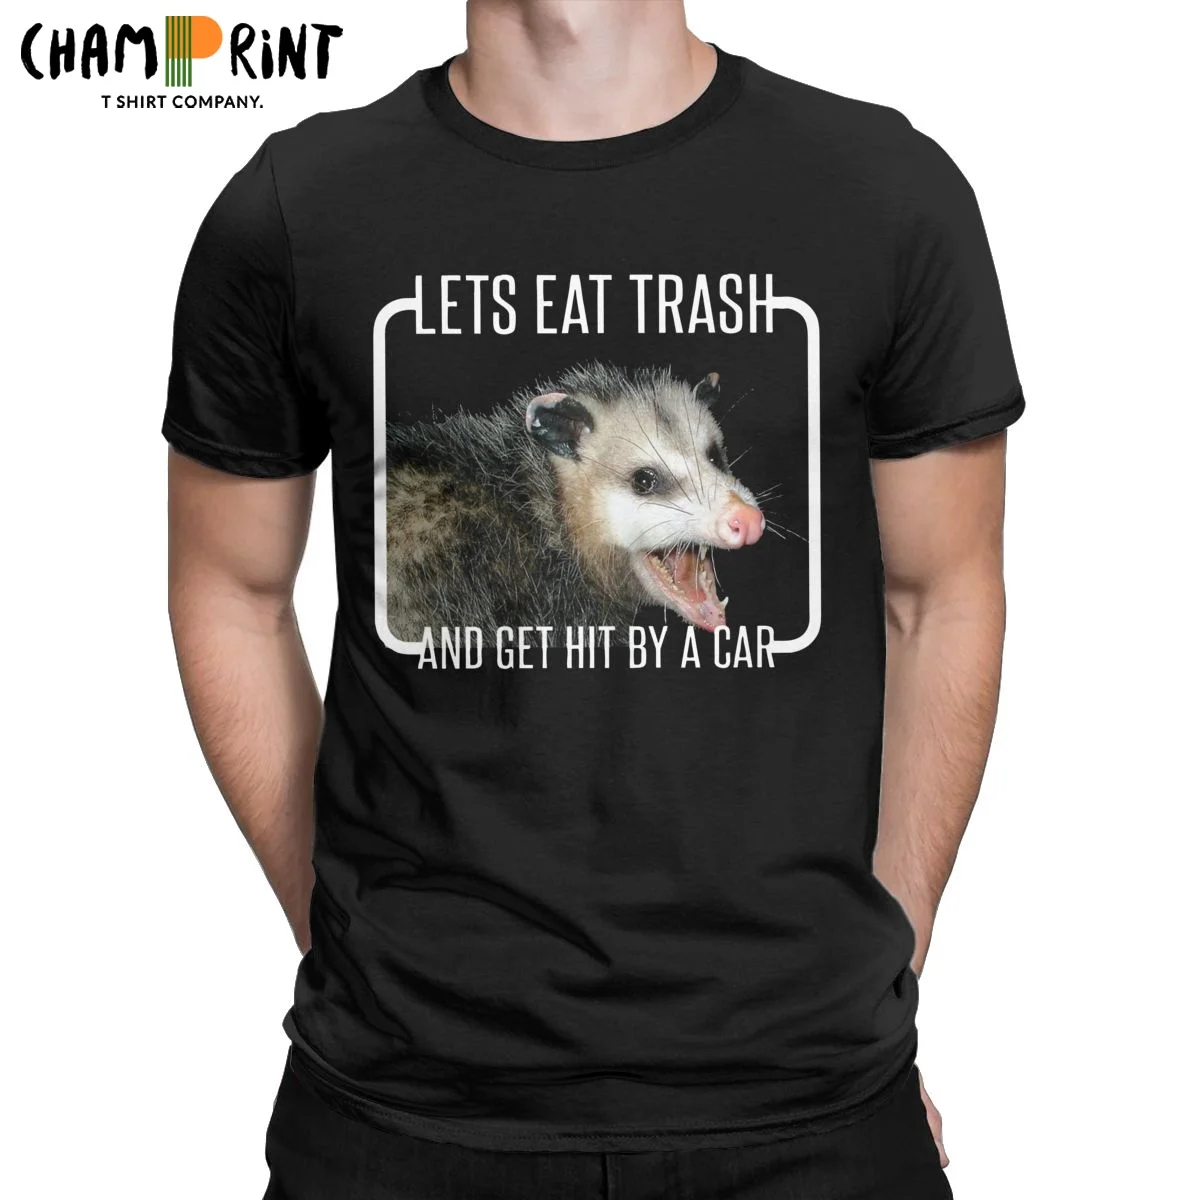 

Lets Eat Trash And Get Hit By A Car T Shirts for Men 100% Cotton Casual T-Shirt Crewneck Cute Tee Shirt Short Sleeve Clothing